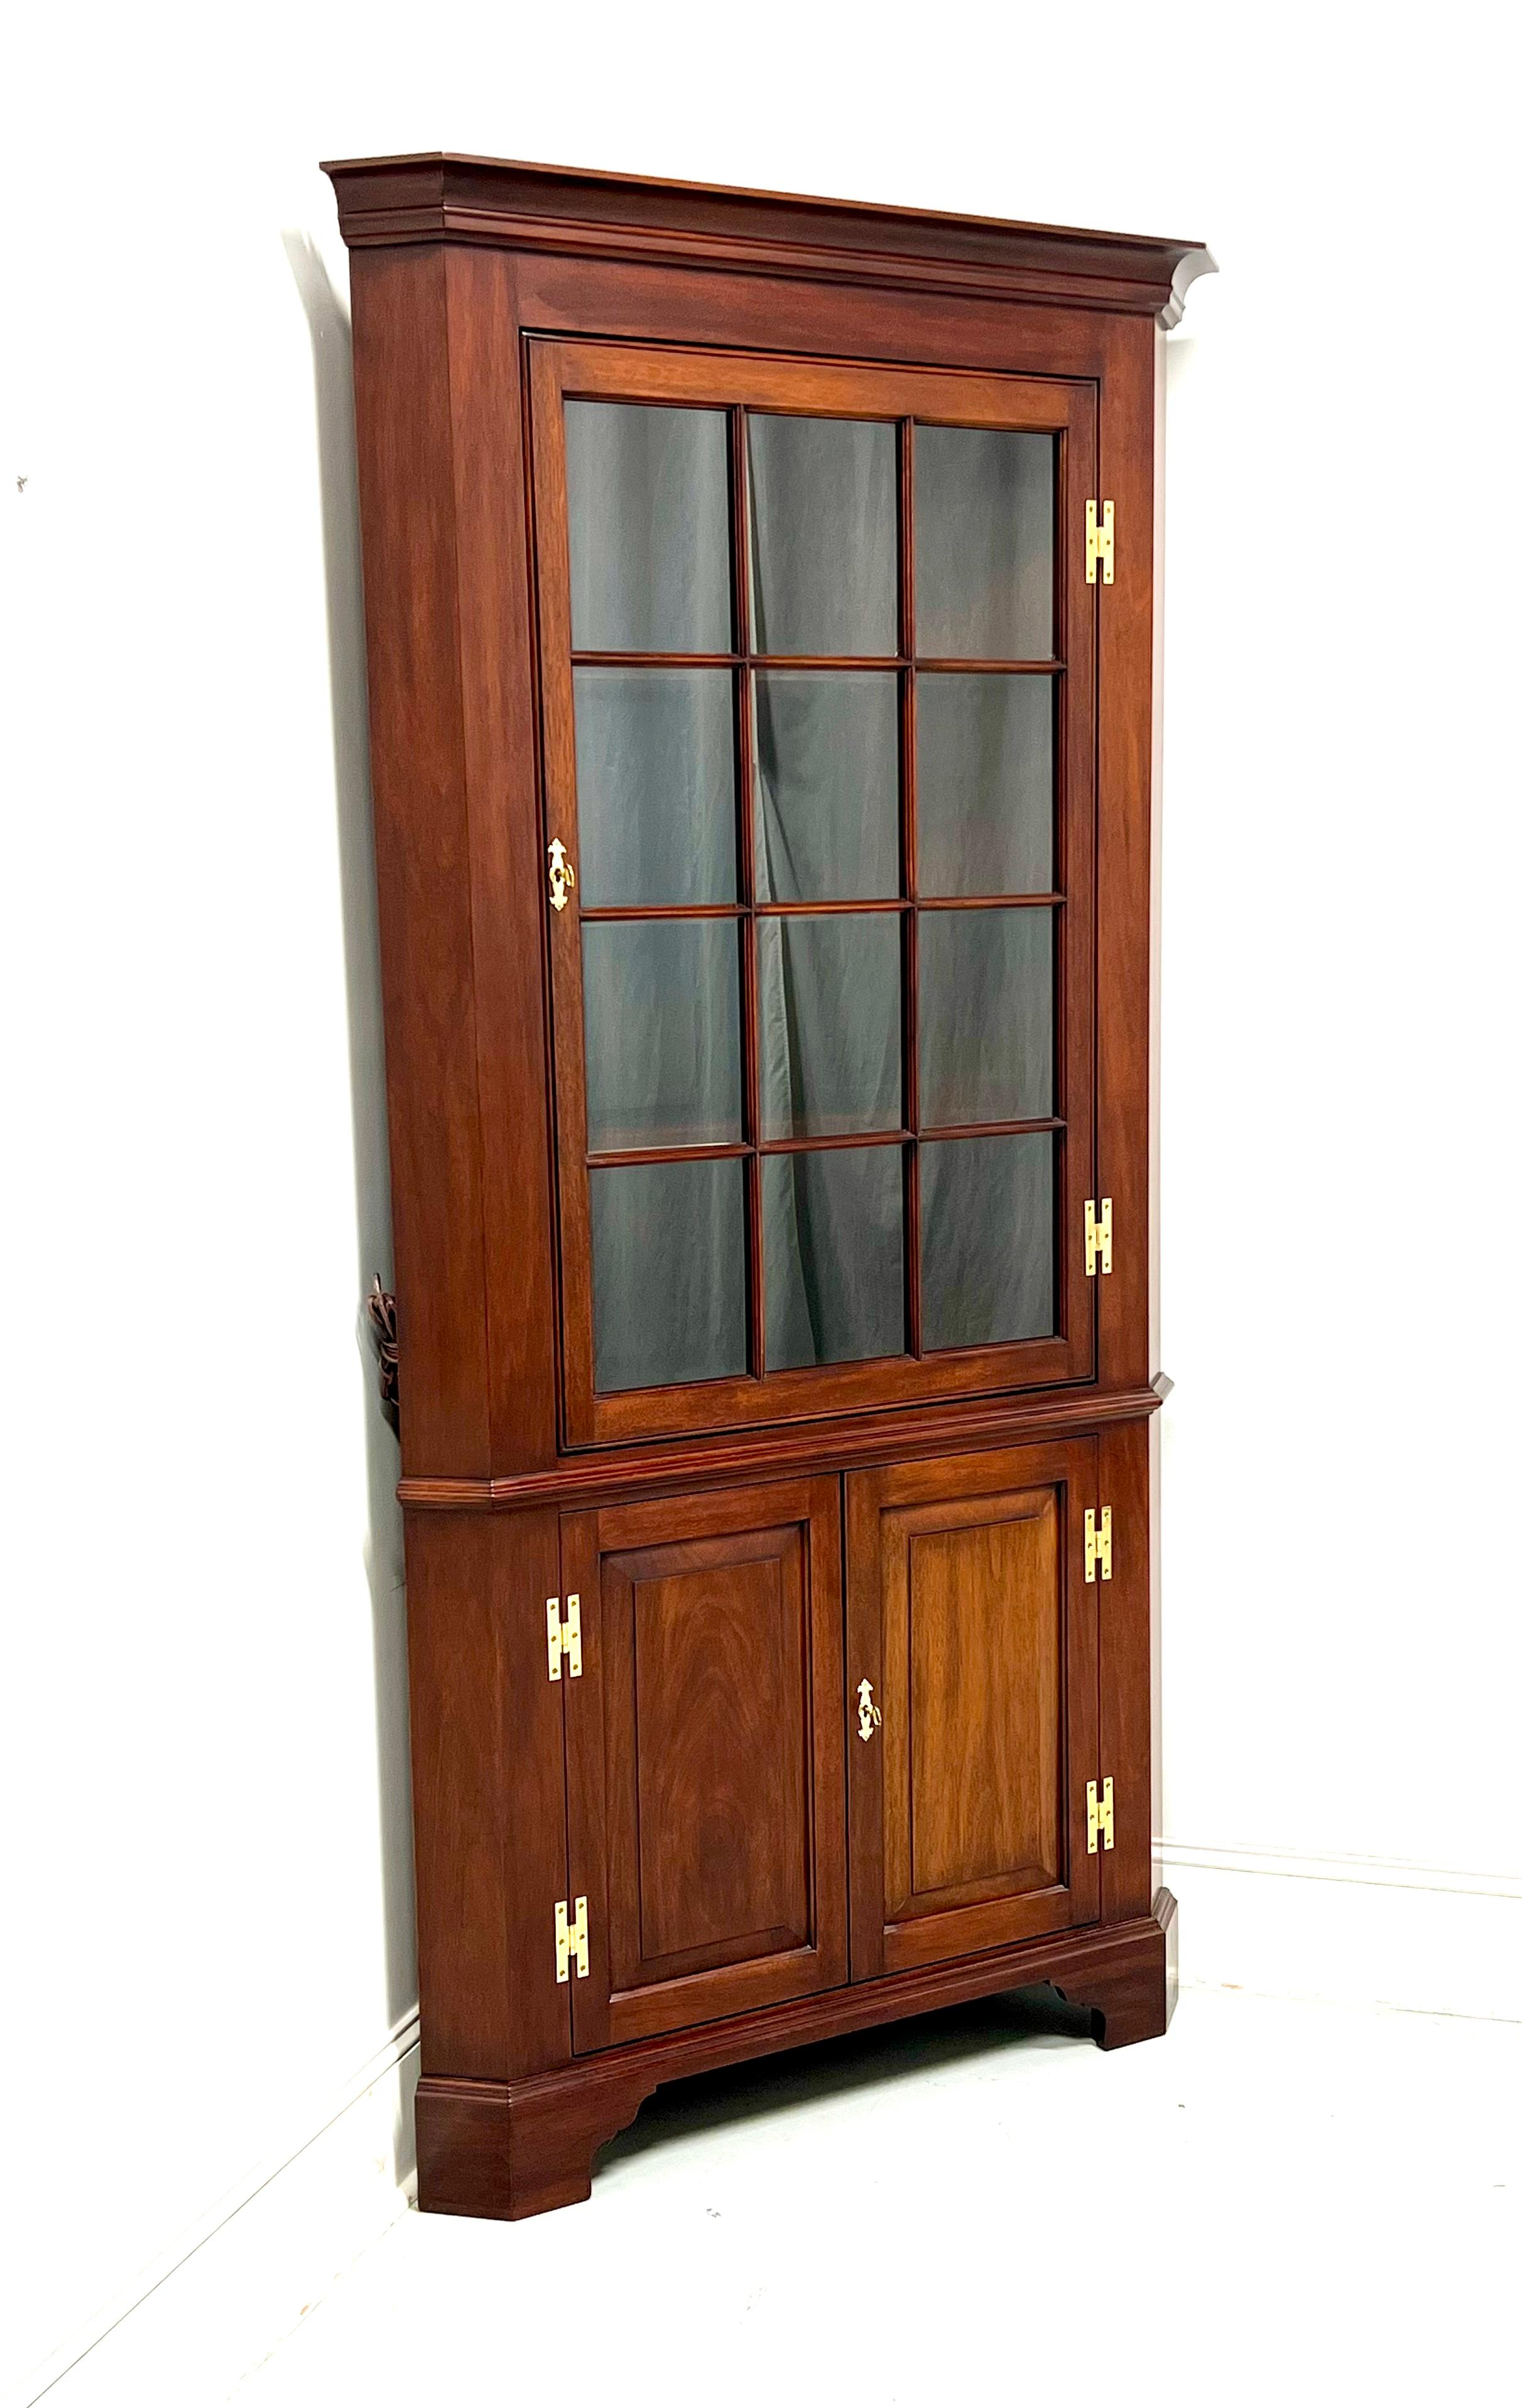 A Chippendale style corner display cabinet by Henkel Harris, their Fairfax. Solid mahogany with brass hardware and bracket feet. Upper lighted cabinet features three fixed wooden shelves with plate grooves behind a lockable single door with 12 glass